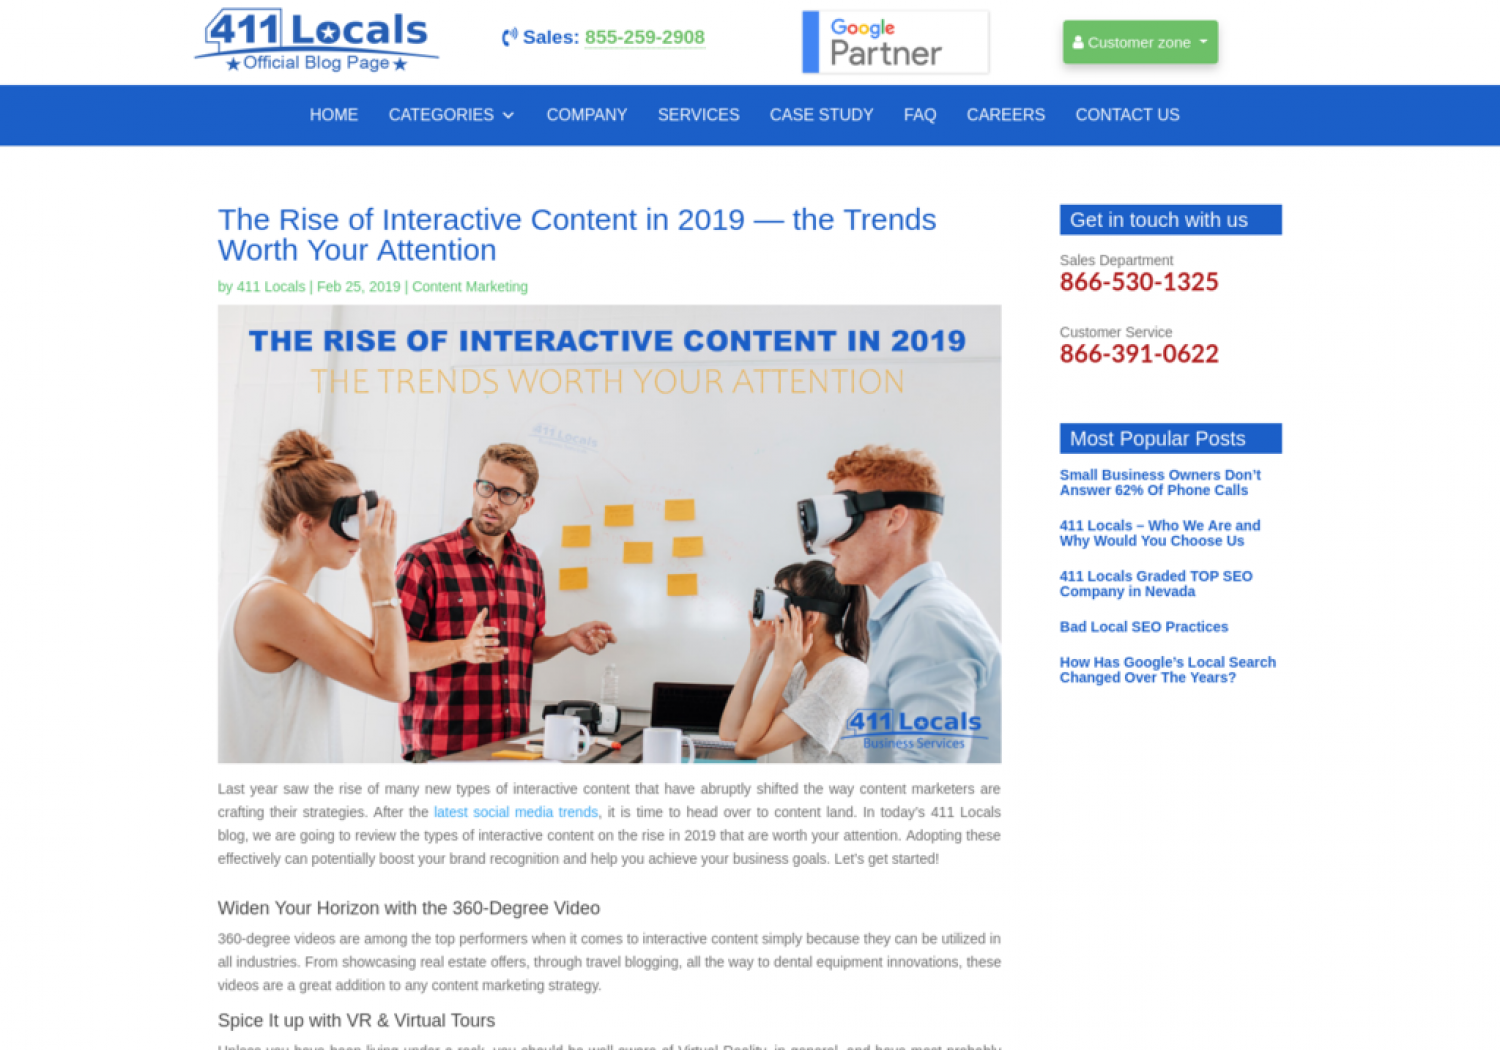 The Rise of Interactive Content in 2019 — the Trends Worth Your Attention Infographic